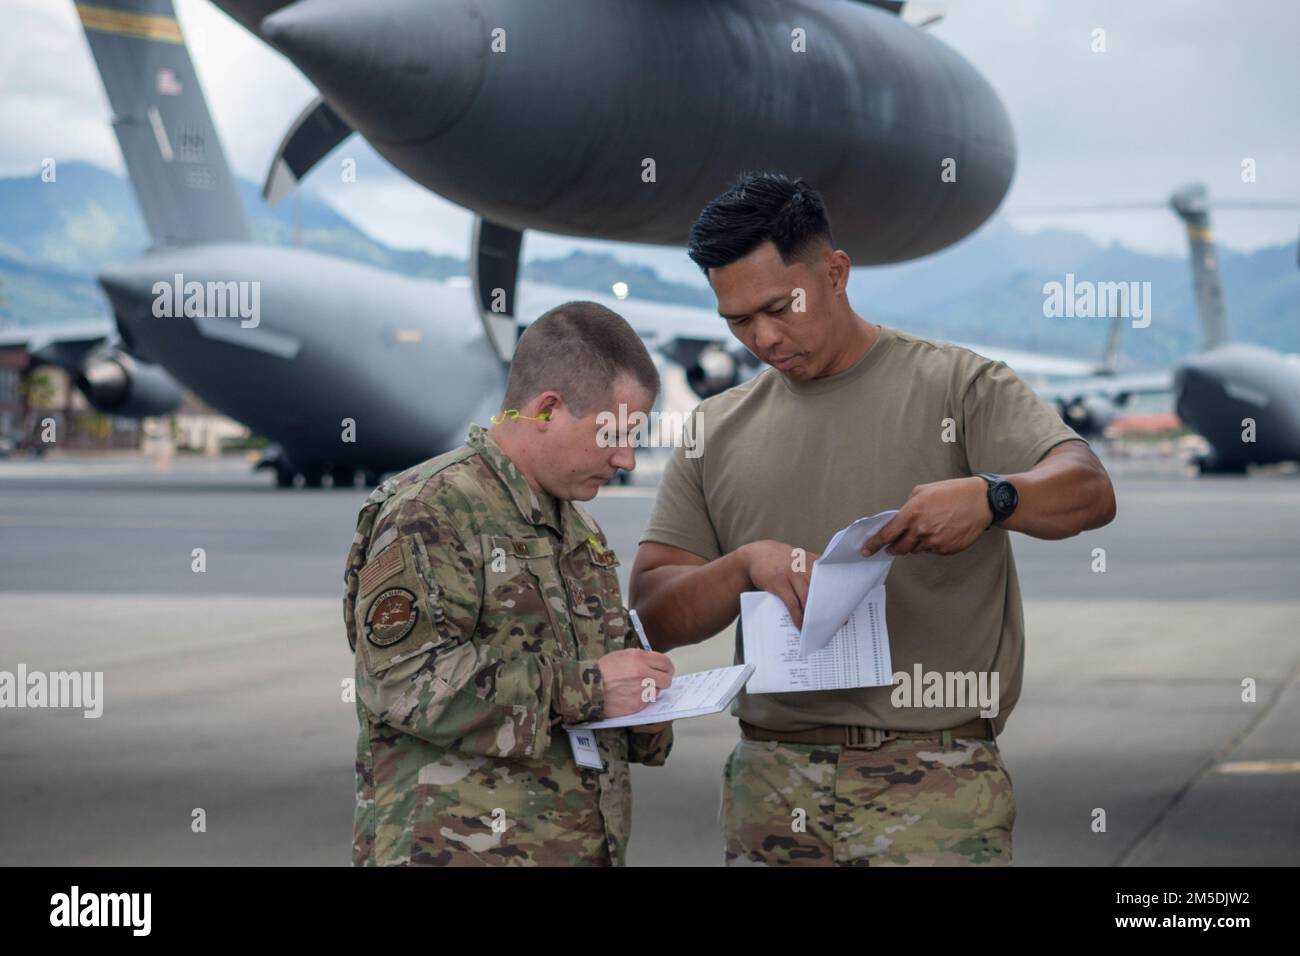 U.S. Air Force Tech. Sgt. Jack Sand, assigned to the 152nd Logistics Readiness Squadron (LRS), left, and Tech. Sgt. Dennis Dedicatoria, assigned to the 154th LRS, review cargo paperwork prior to loading onto a Nevada ANG C-130 Hercules March 5, 2022, at Joint Base Pearl Harbor-Hickam, Hawaii. The Hawaii ANG, Nevada ANG, and their active-duty counterparts from the 15th Wing and Alaska participated in the first-of-its-kind Ho'oikaika Exercise. The exercise served as an opportunity for partnered units to demonstrate and improve their ability to quickly deploy and operate at remote locations. Stock Photo